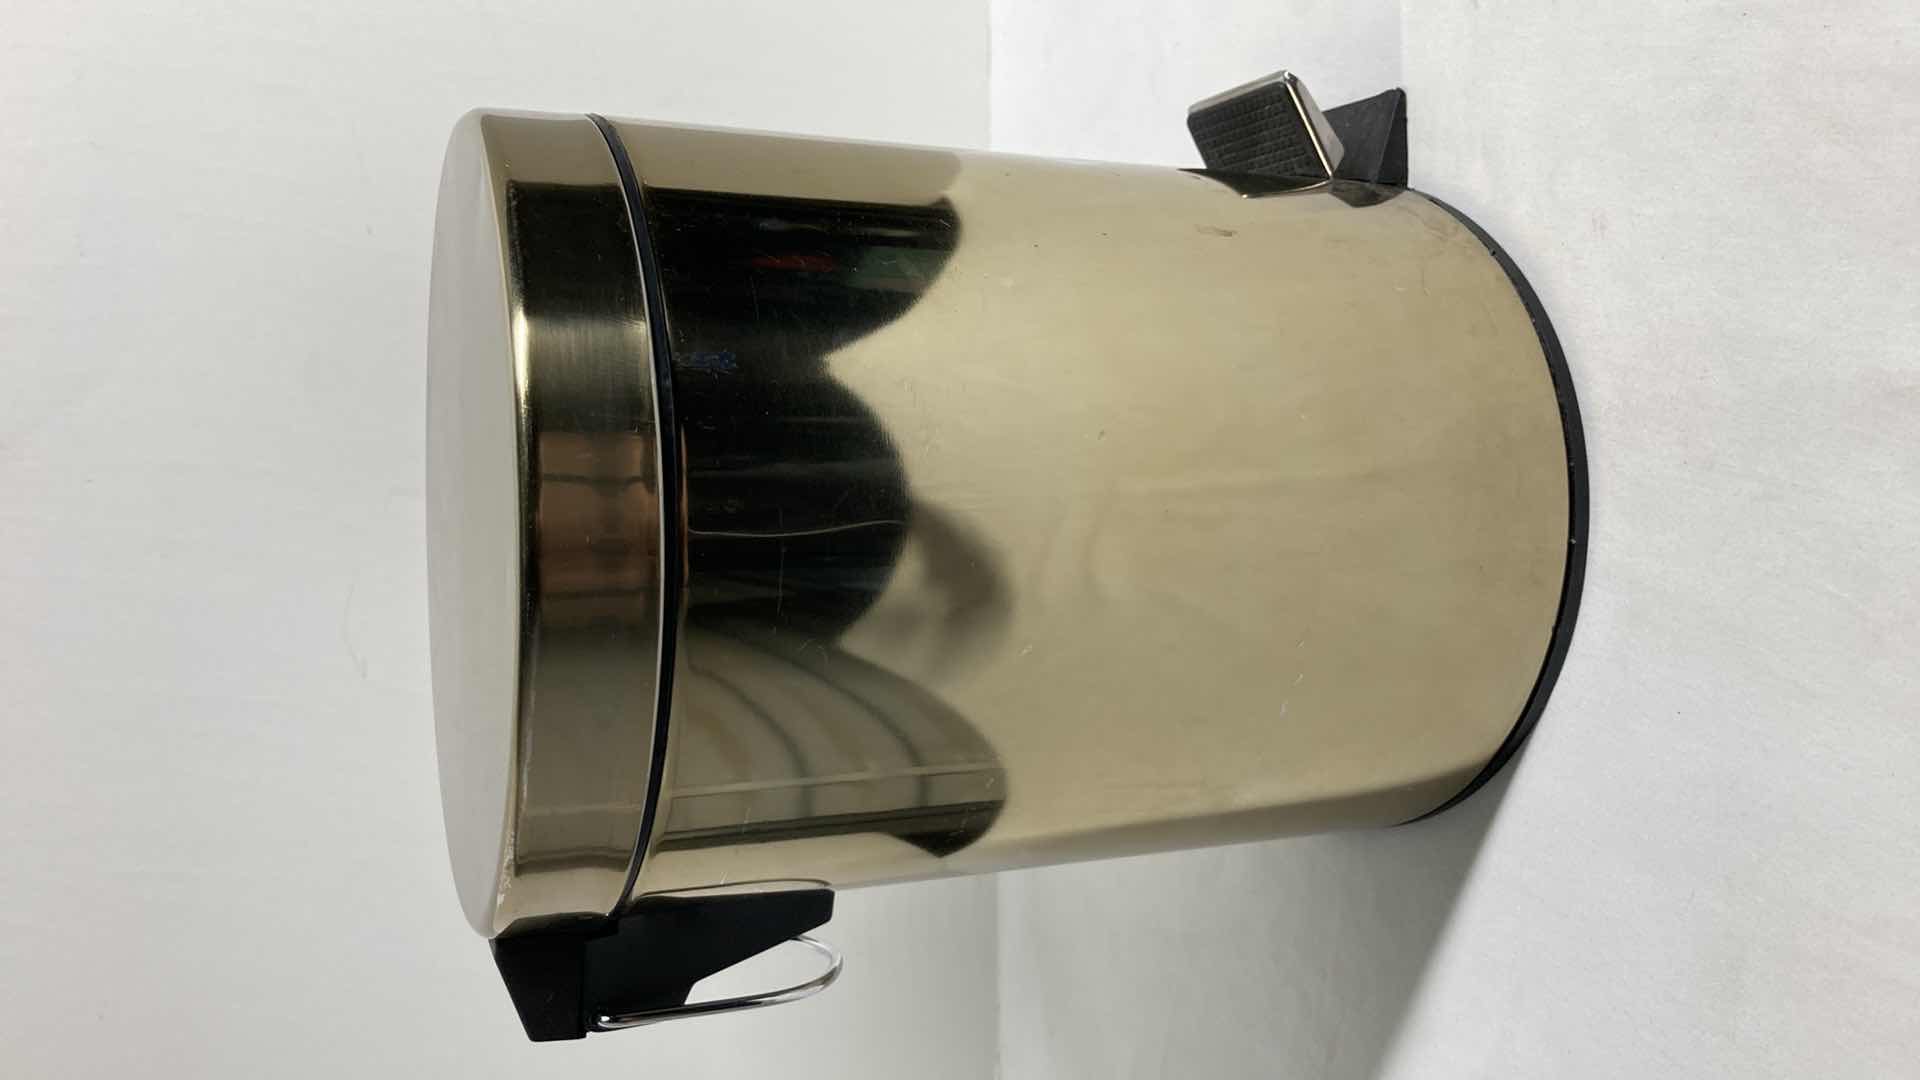 Photo 4 of STEP LEVER SOFT BRASS FINISH 5LITER TRASH CAN